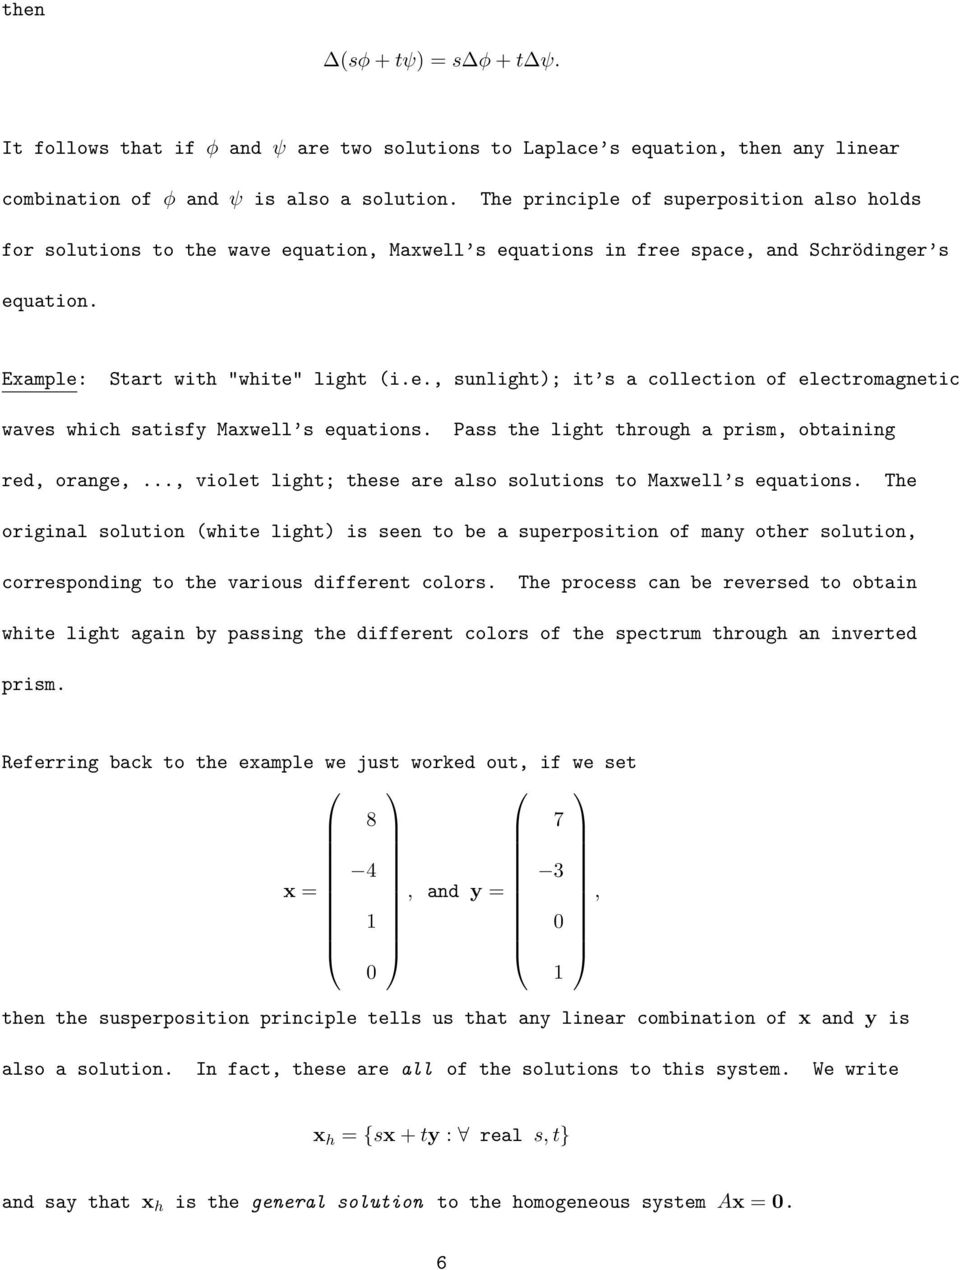 satisfy Maxwell s equations Pass the light through a prism, obtaining red, orange,, violet light; these are also solutions to Maxwell s equations The original solution (white light) is seen to be a